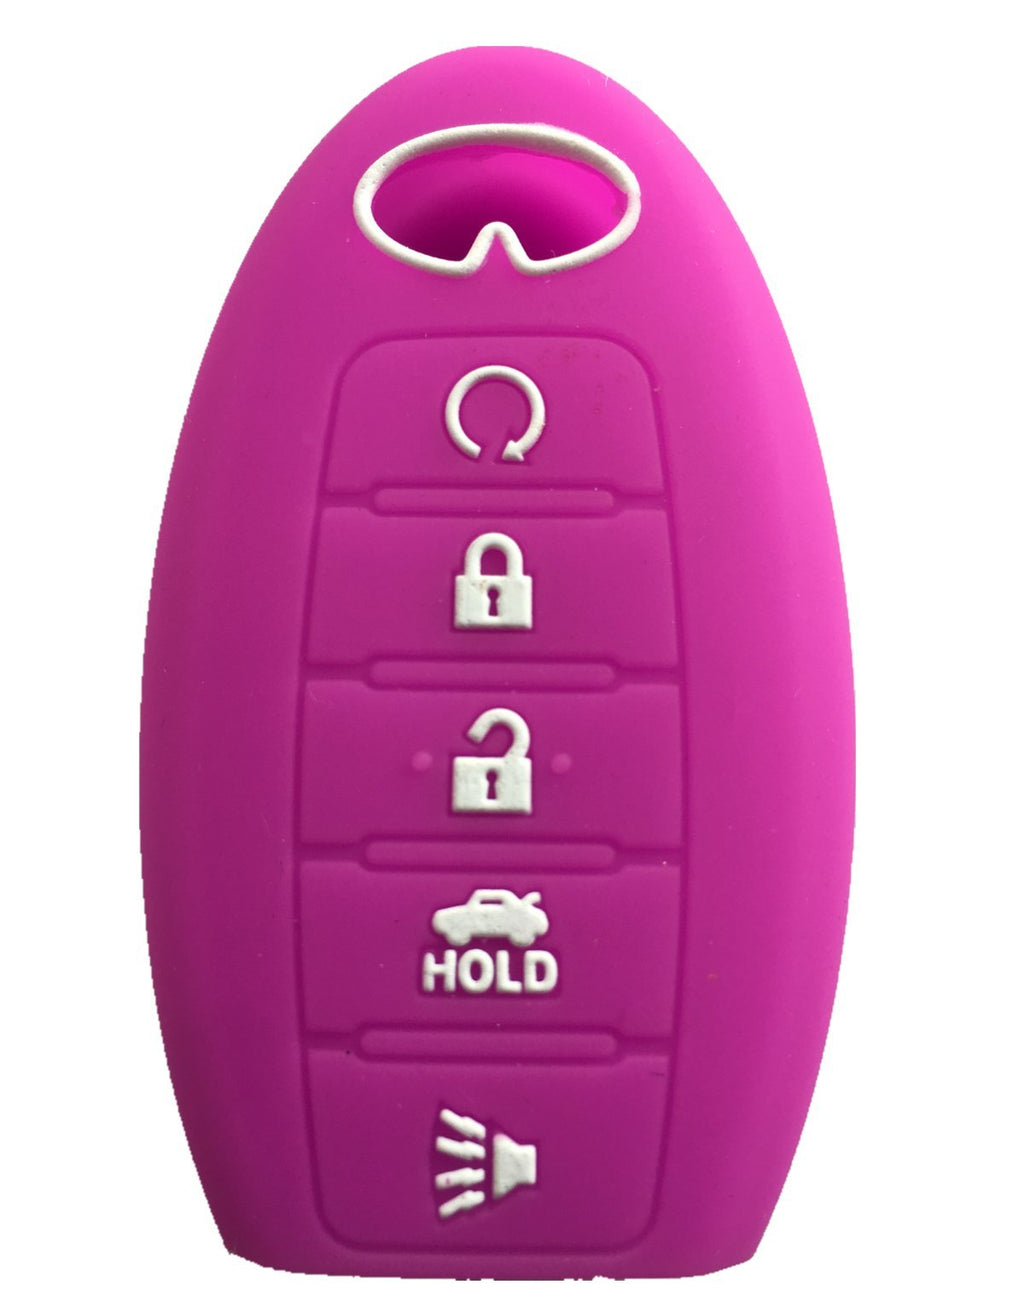  [AUSTRALIA] - Rpkey Silicone Keyless Entry Remote Control Key Fob Cover Case protector For Infiniti g35 qx56 fx35 q50 g37 m35 qx60 i35 qx80 q60 qx30 for 5 buttons（Violet）S180144014